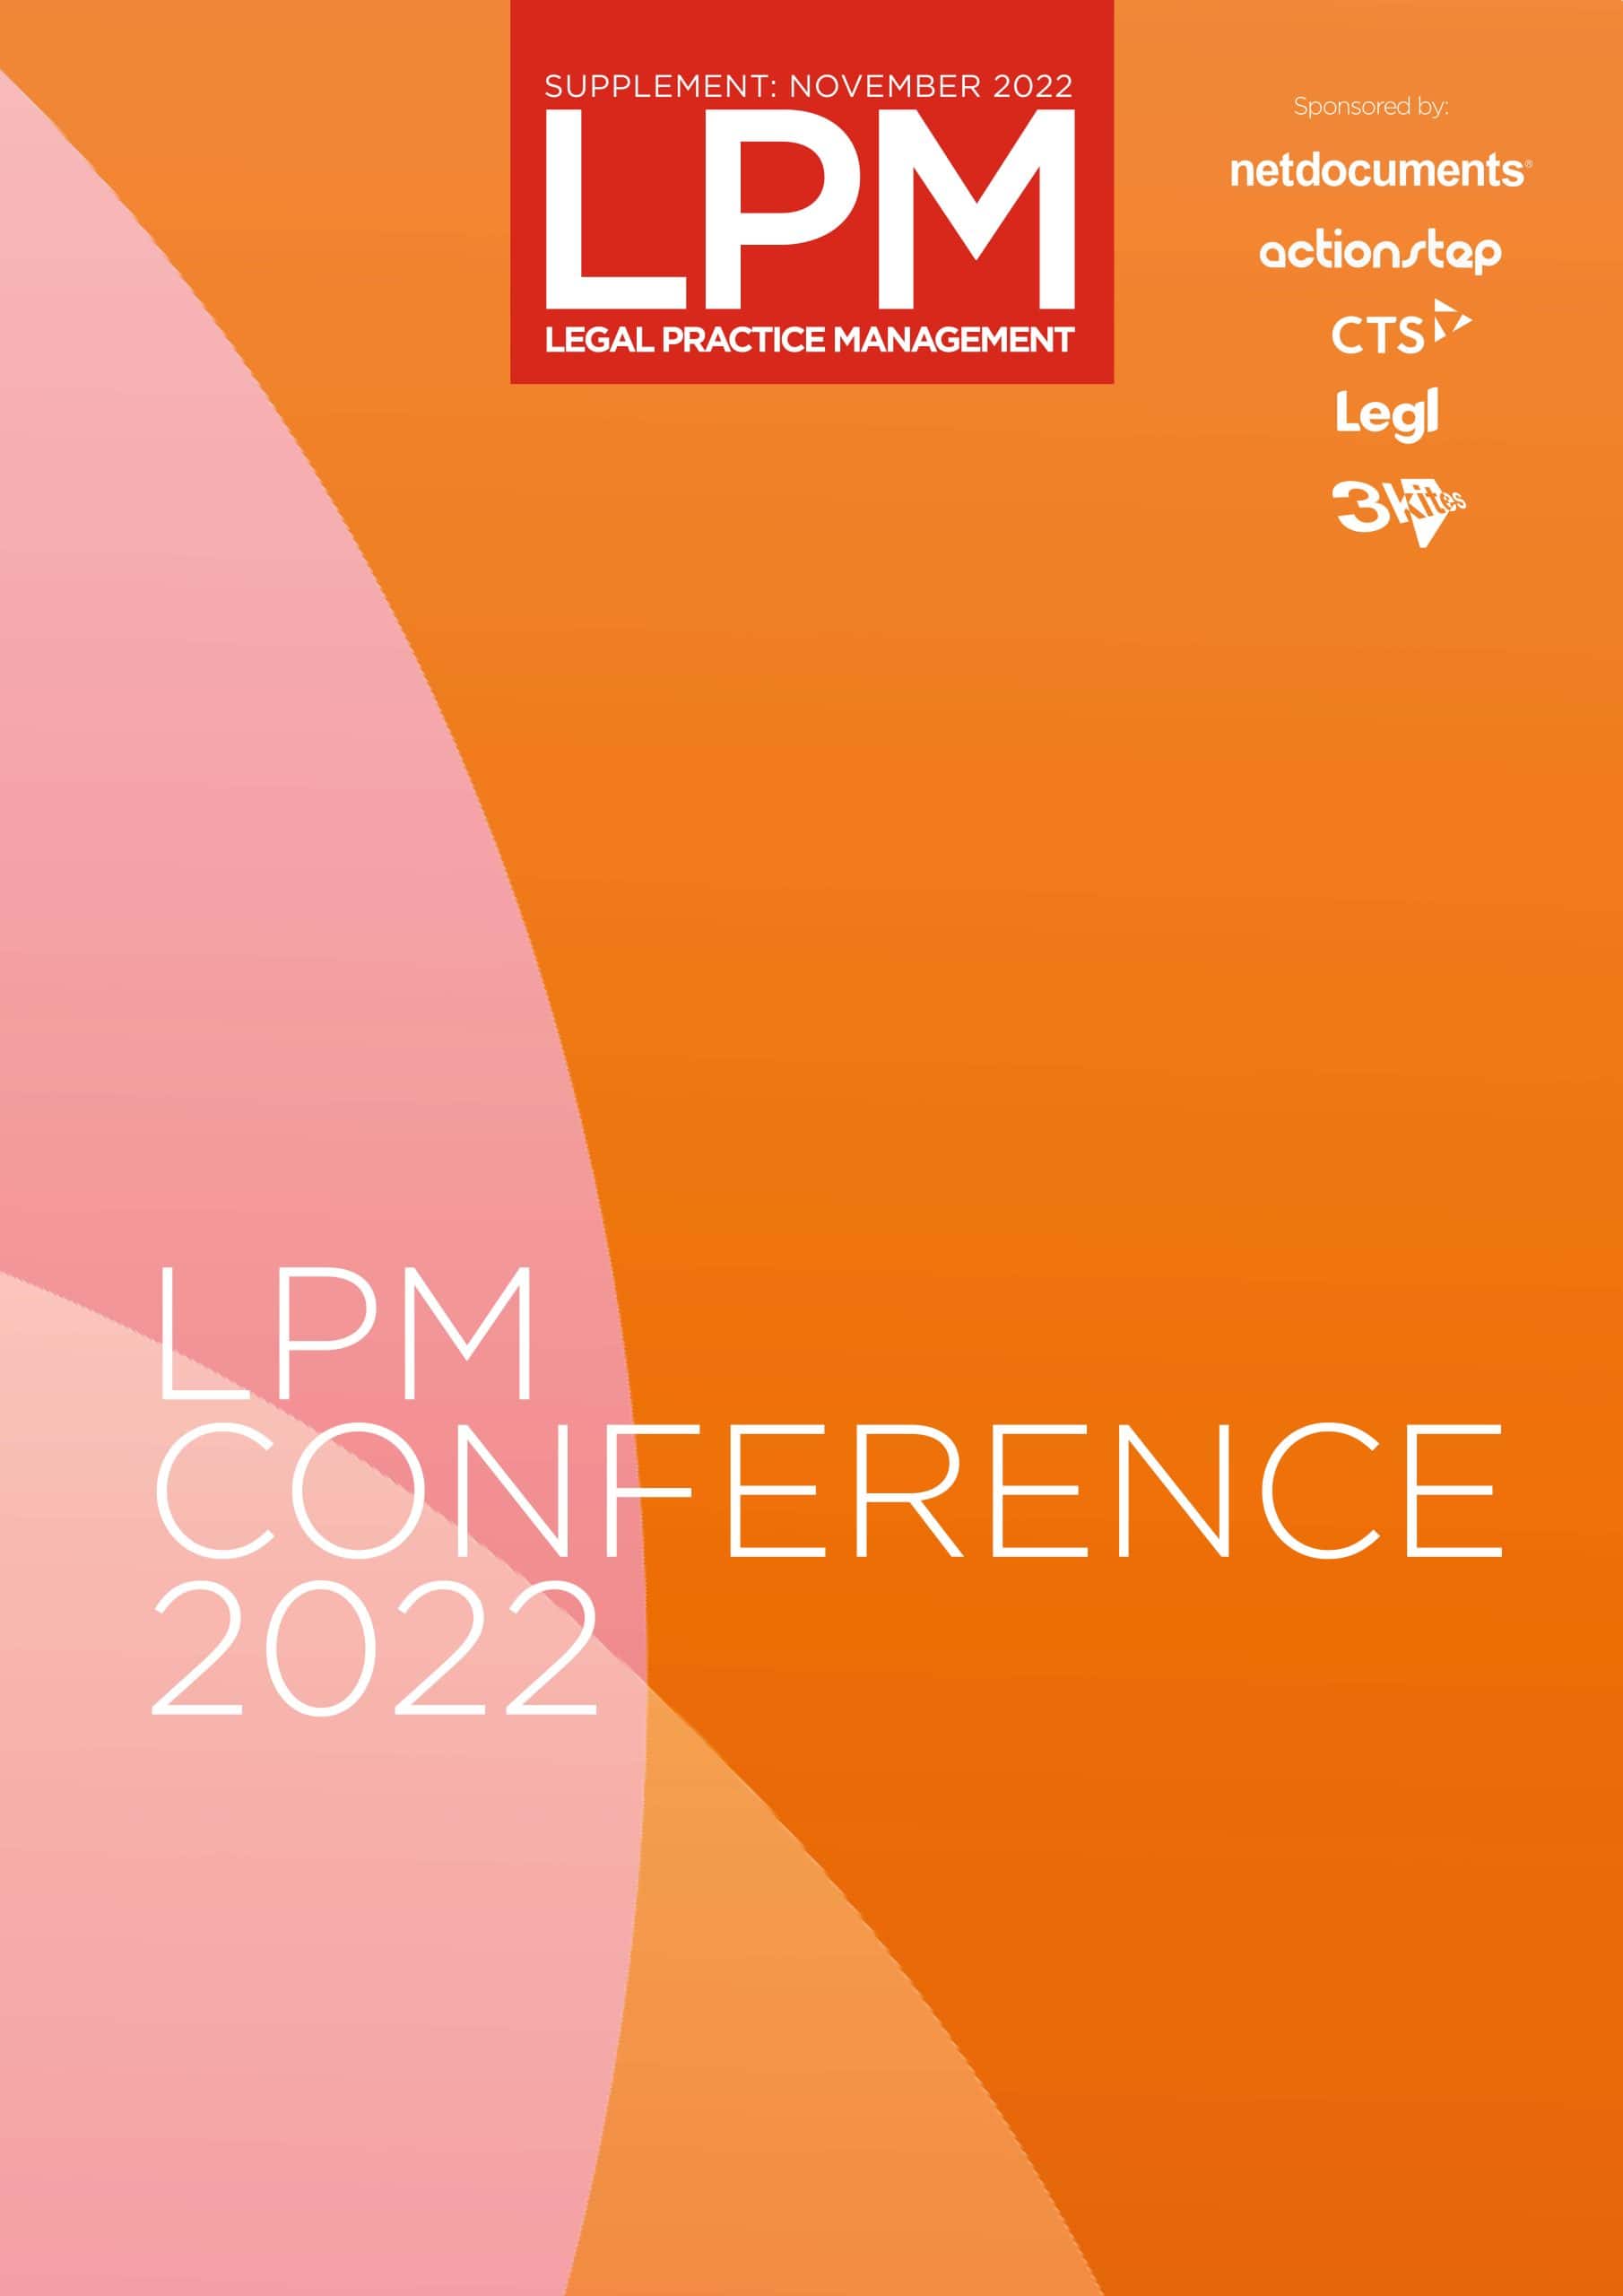 LPM Conference 2022